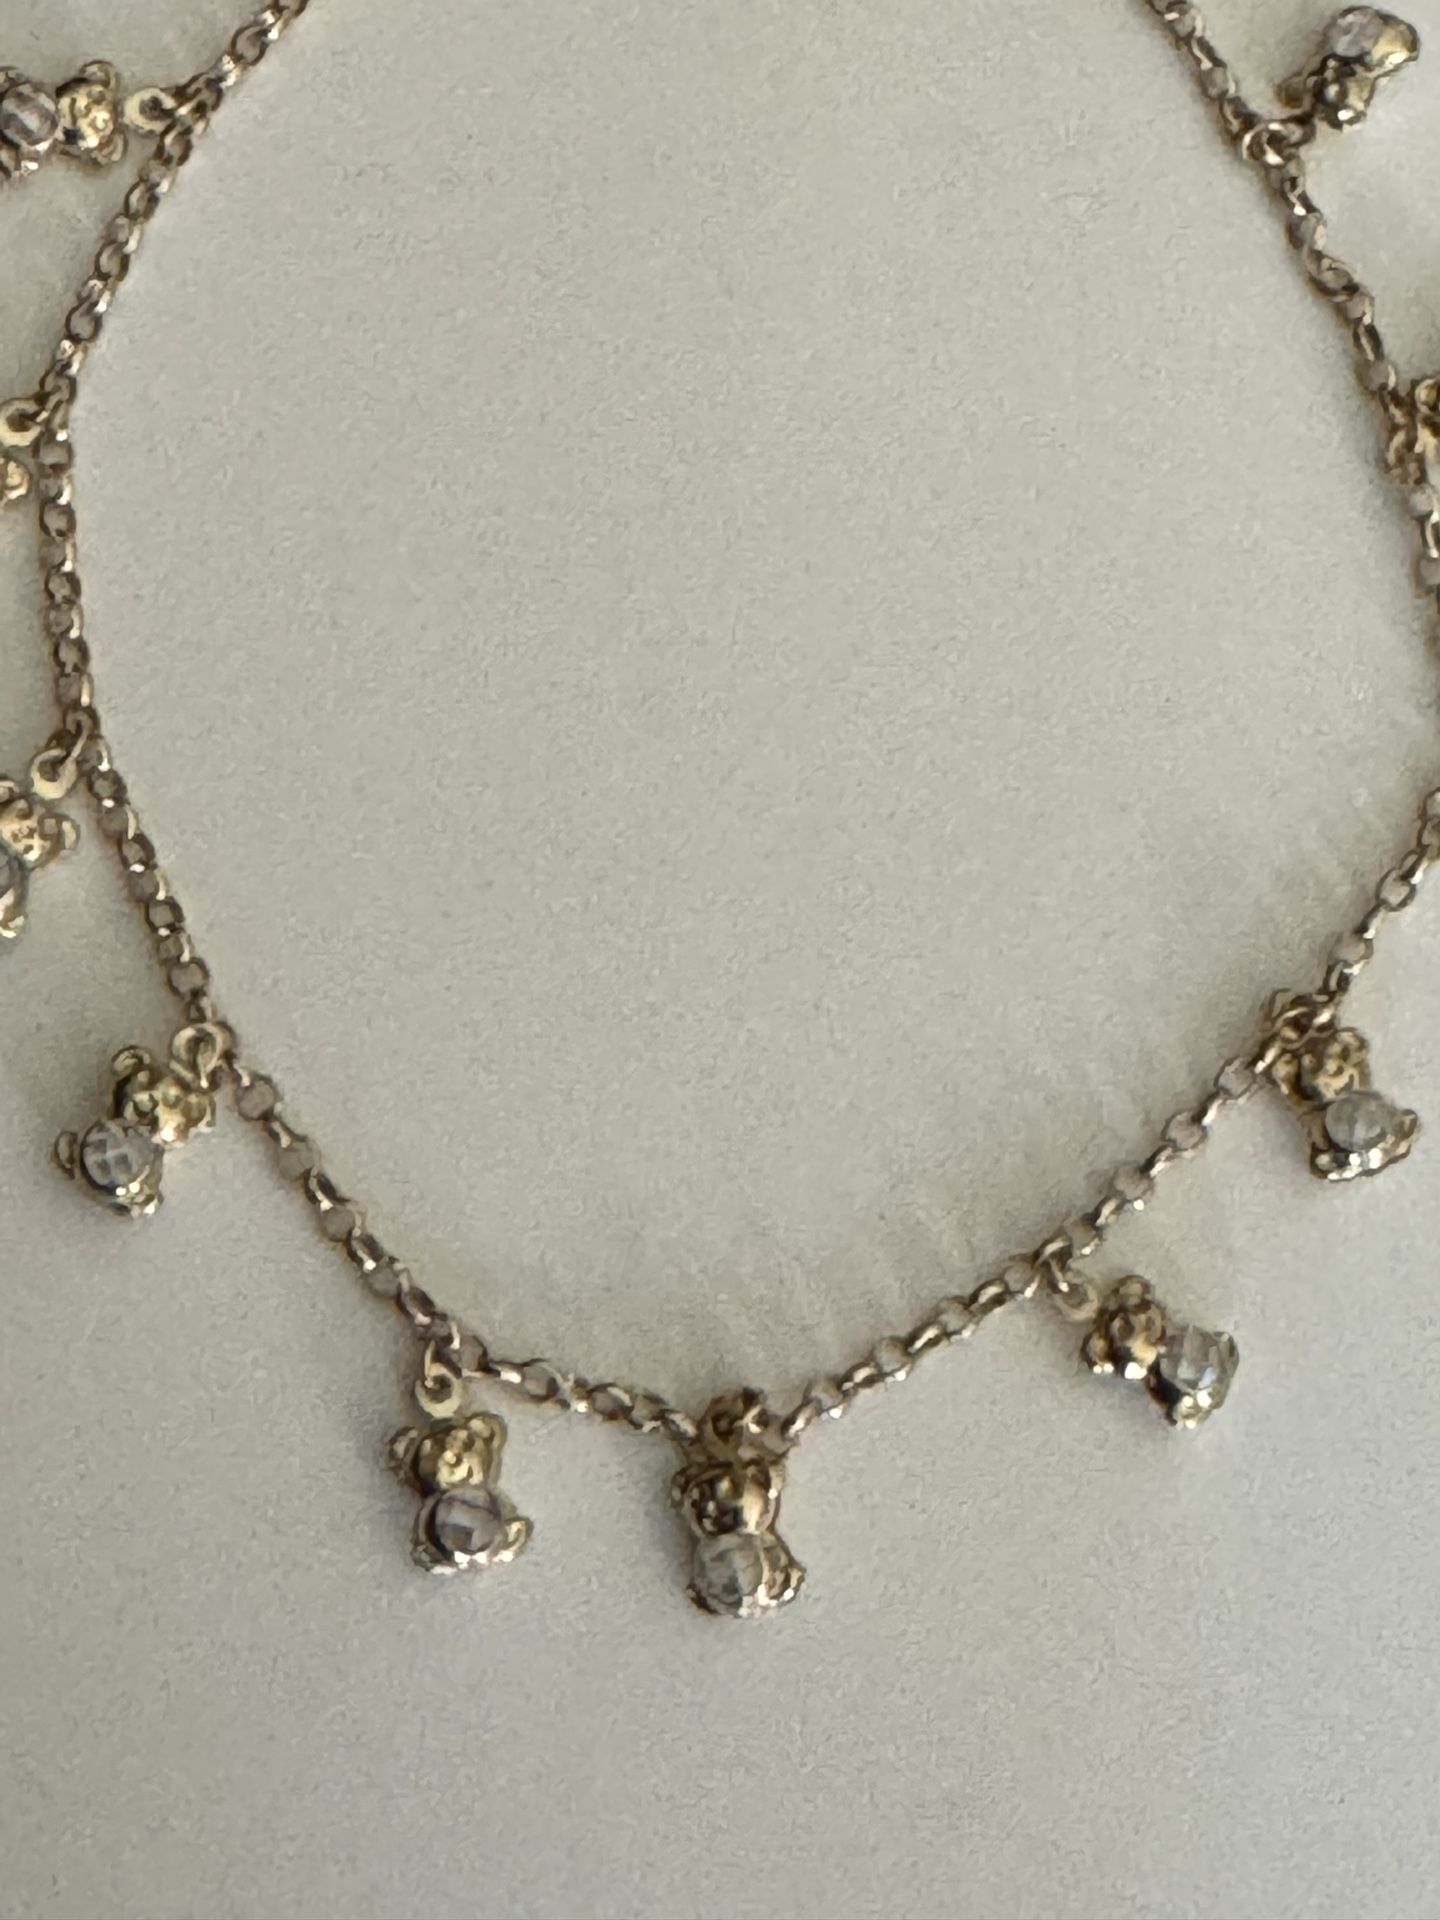 10kt Gold Anklet With Small Bears 